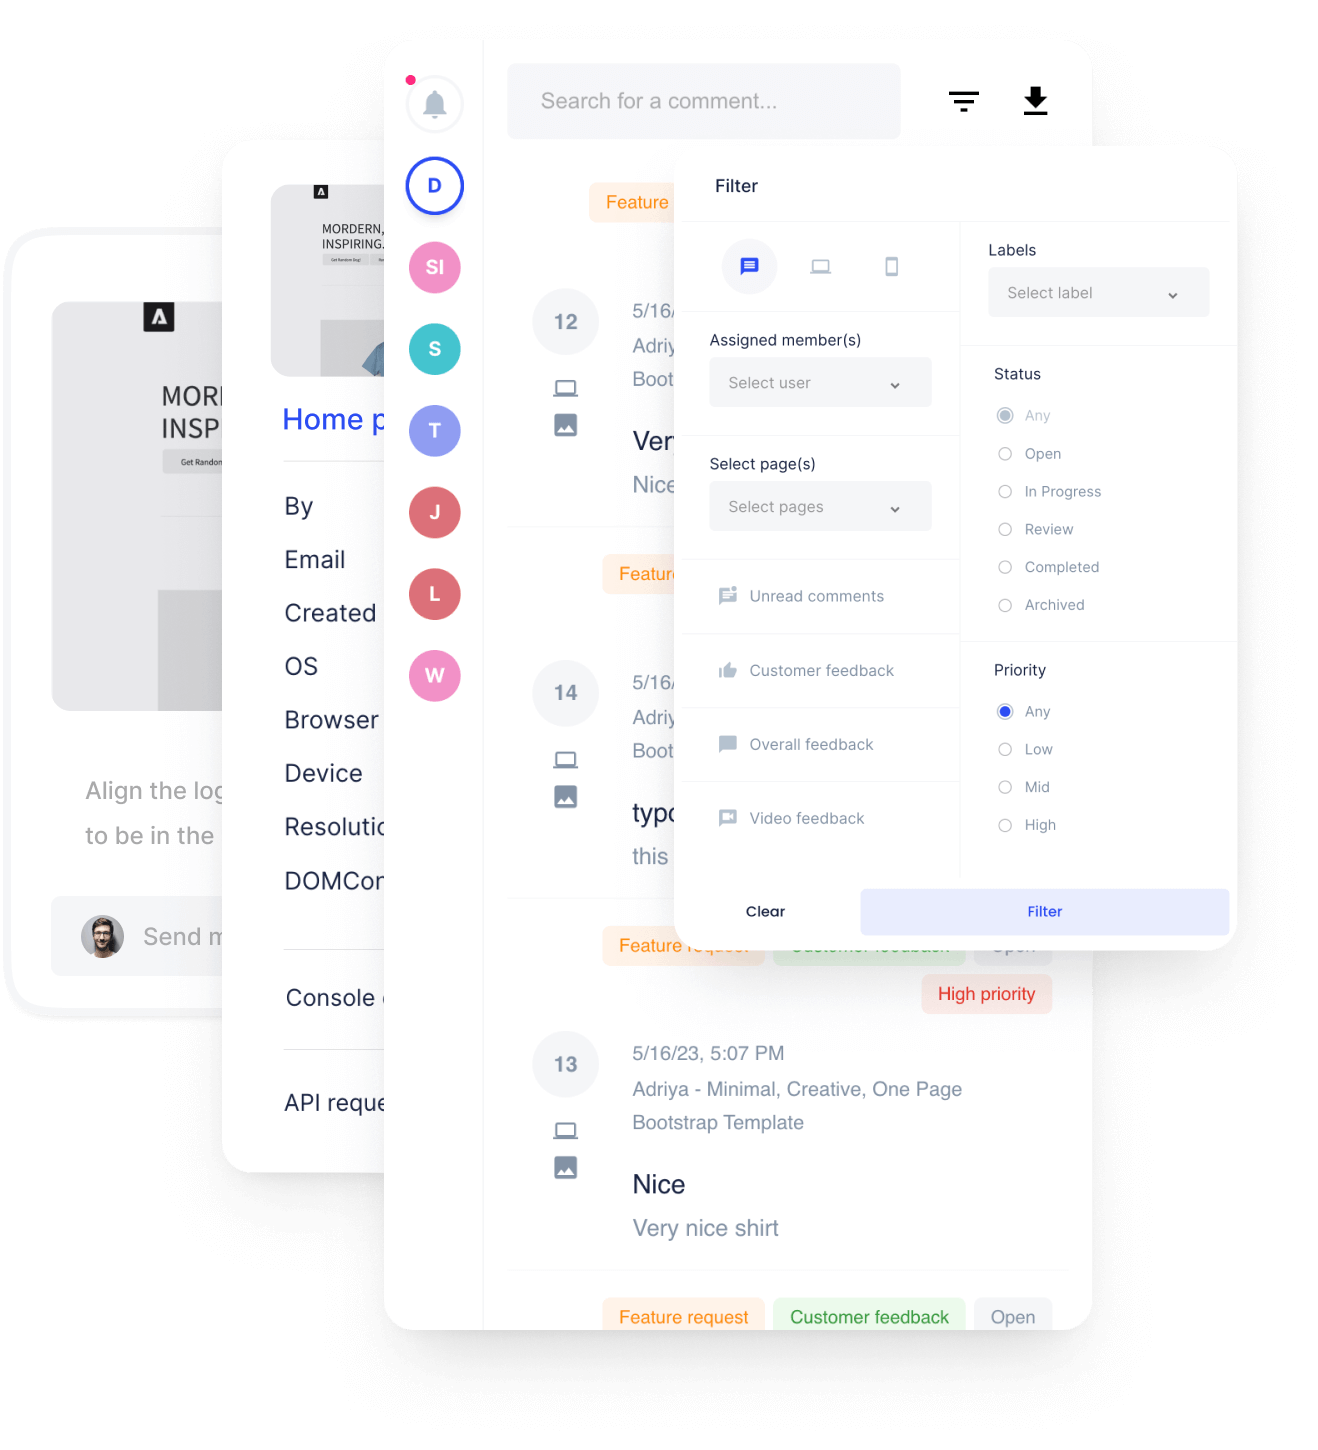 klynd - Smoothly navigate and organize projects on a unified panel